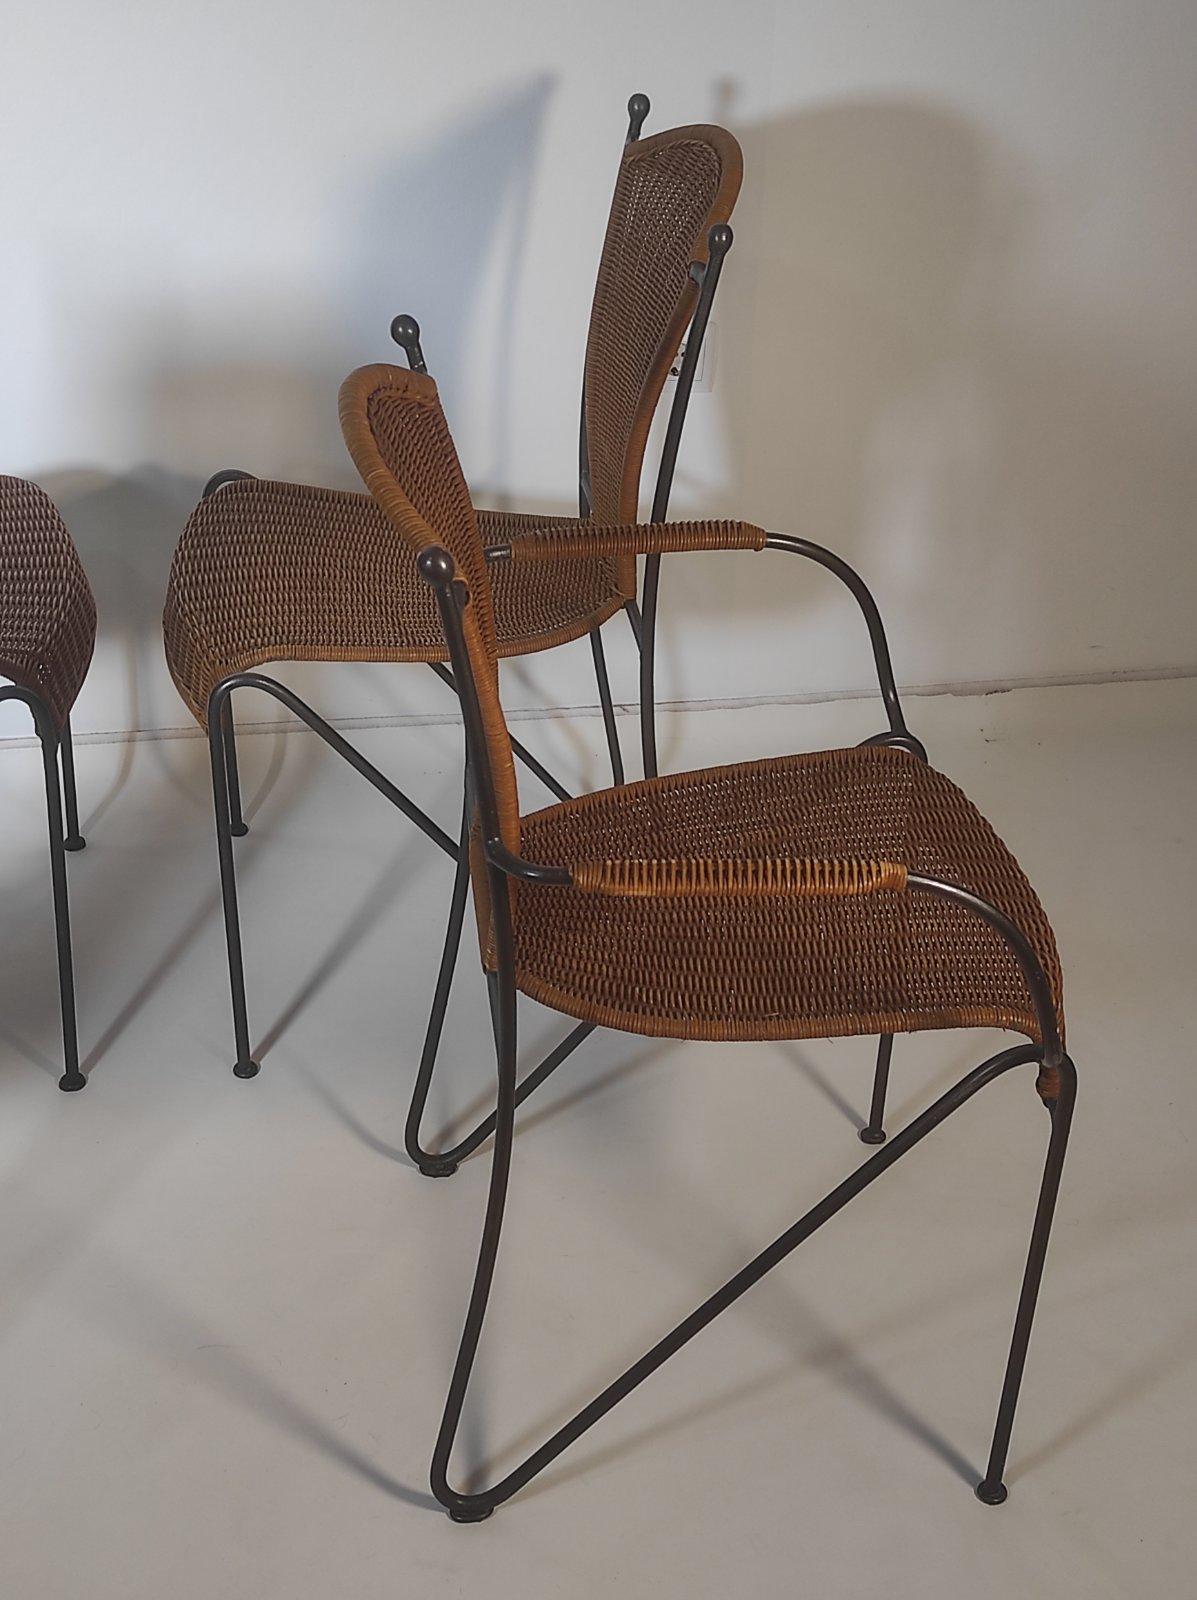 American  Set of Four Wicker and Iron Chair By Frederic Weinberg 1950s